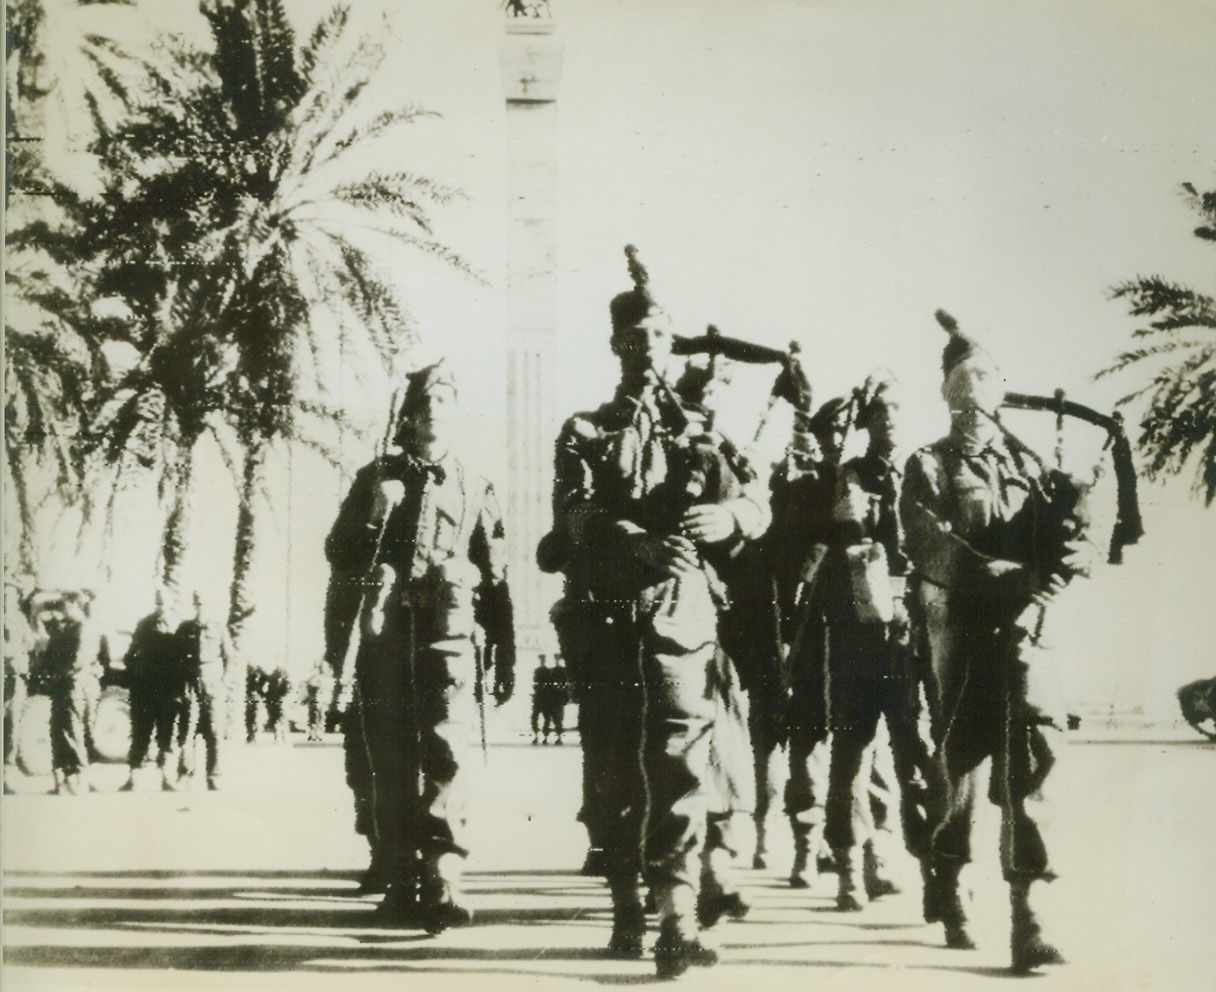 First Photos of Tripoli’s Fall, 1/25/1943. Tripoli—Men of the Gordon Highlanders as they marched into Tripoli with other units of the victorious British Eighth Army, as the once-proud center of Mussolini’s North African Empire was abandoned by German Marshal Rommel’s fleeing Afrika Korps. This photo, transmitted by radio, was one of the first to reach New York after Tripoli’s fall to the Allies. (Passed by censors)Credit: ACME radiophoto;